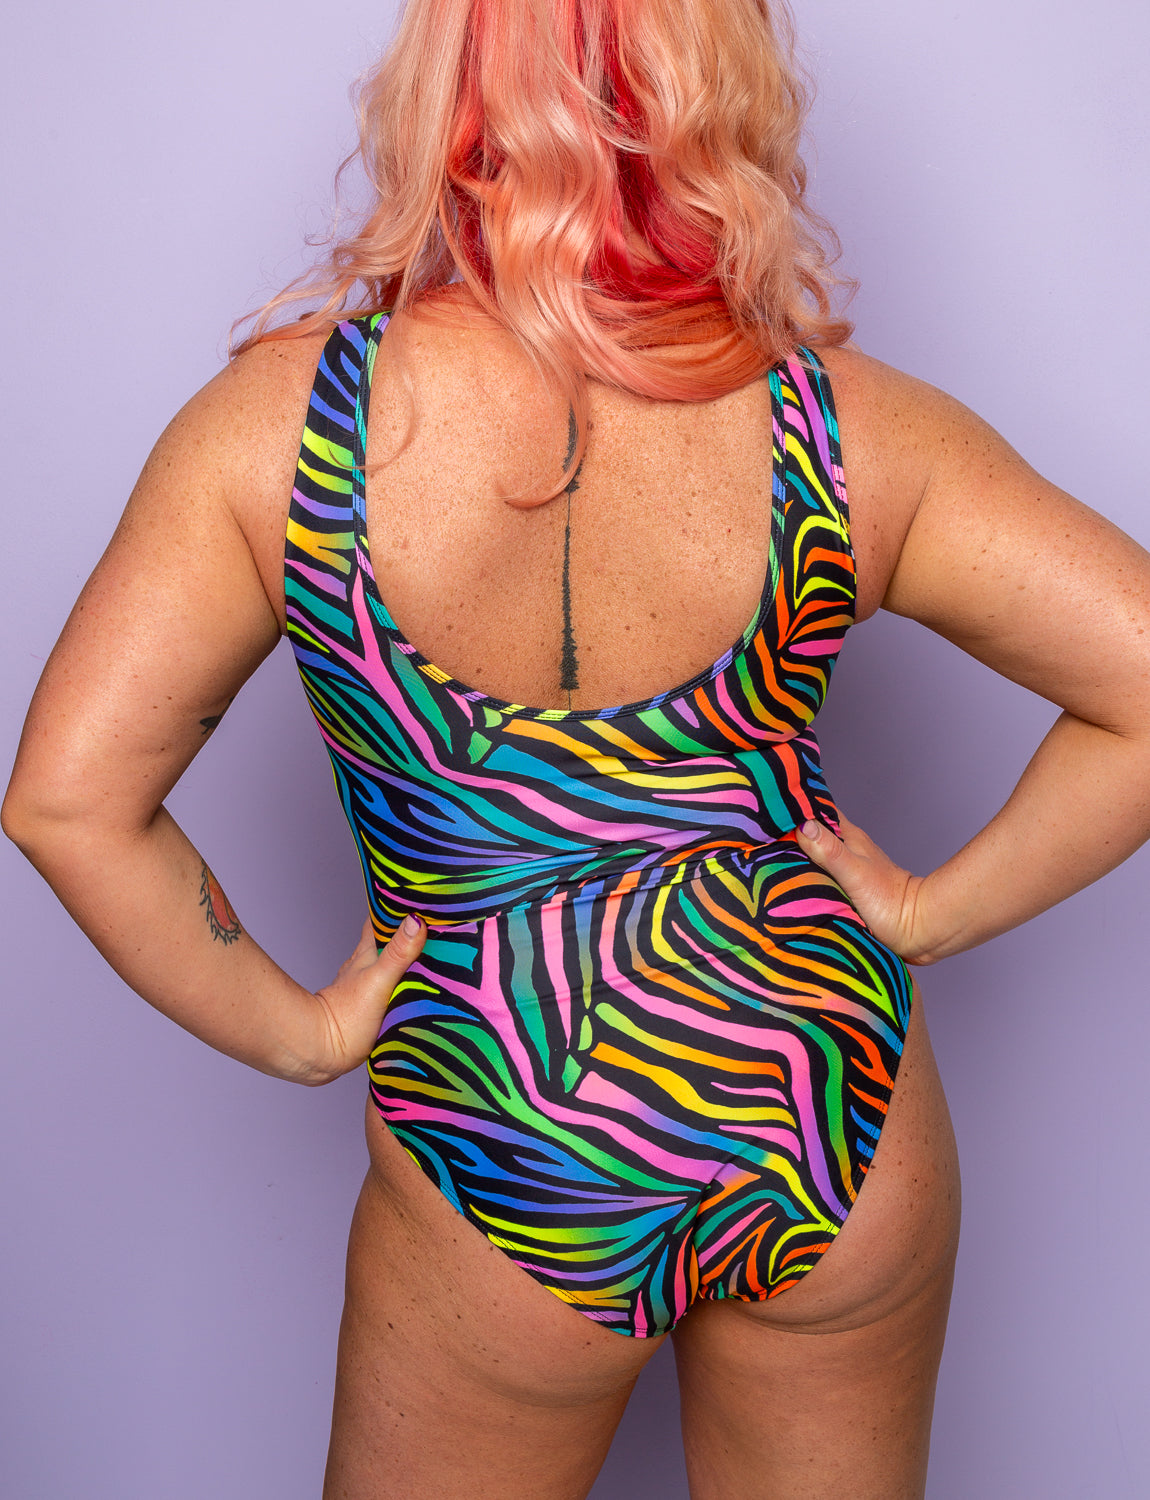 Back view of a woman wearing a rainbow zebra print swimsuit.